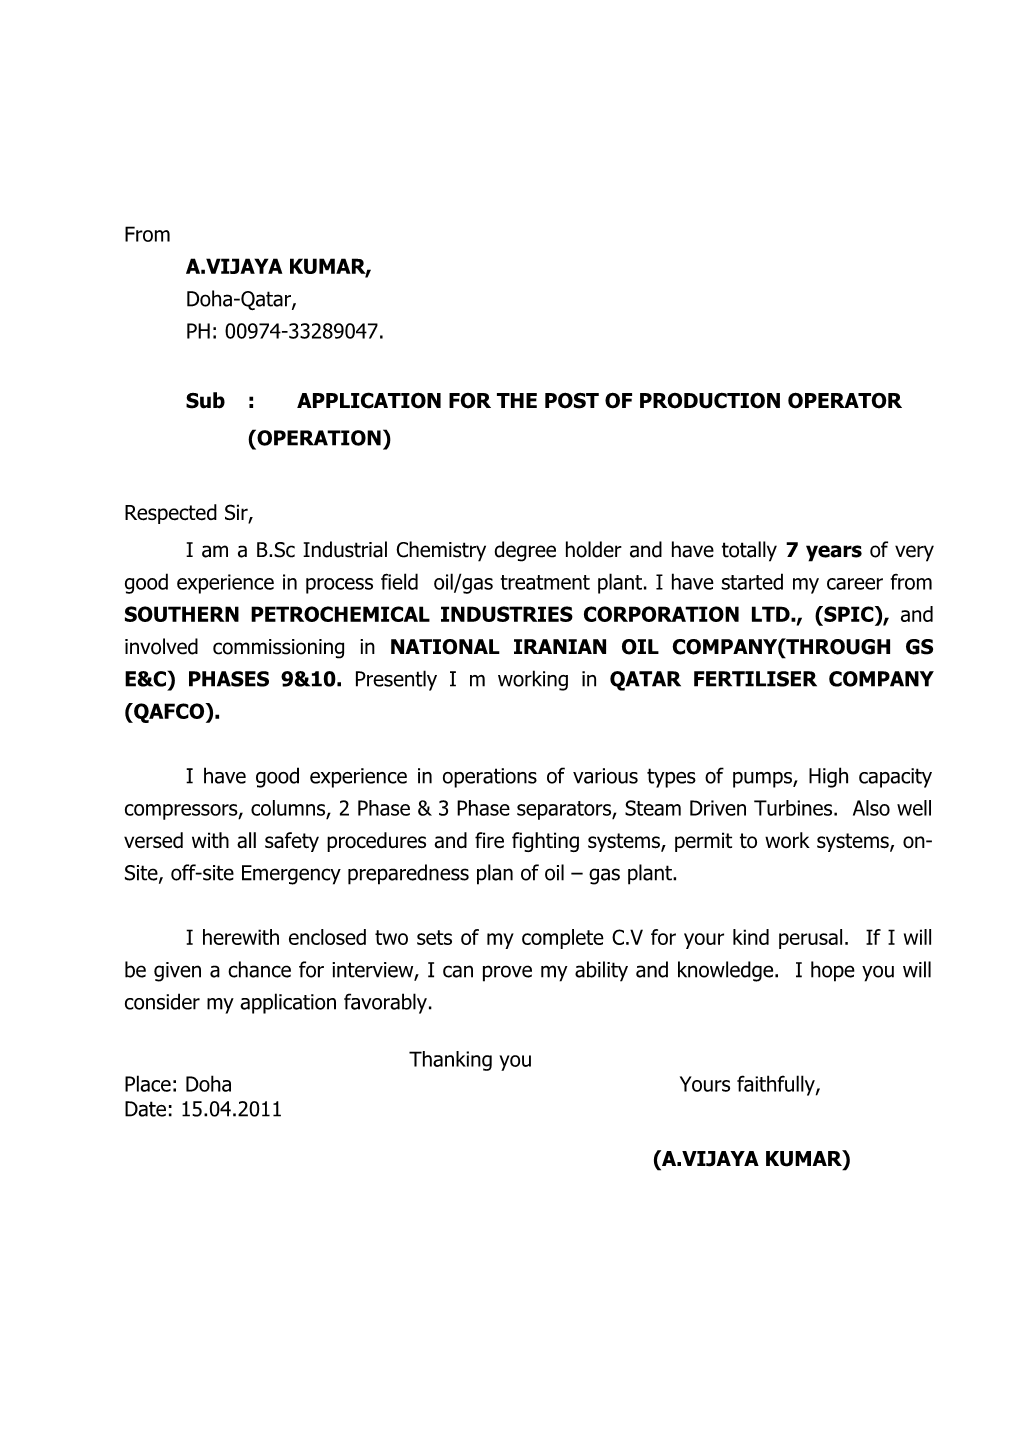 Sub : APPLICATION for the POST of PRODUCTION OPERATOR (OPERATION)